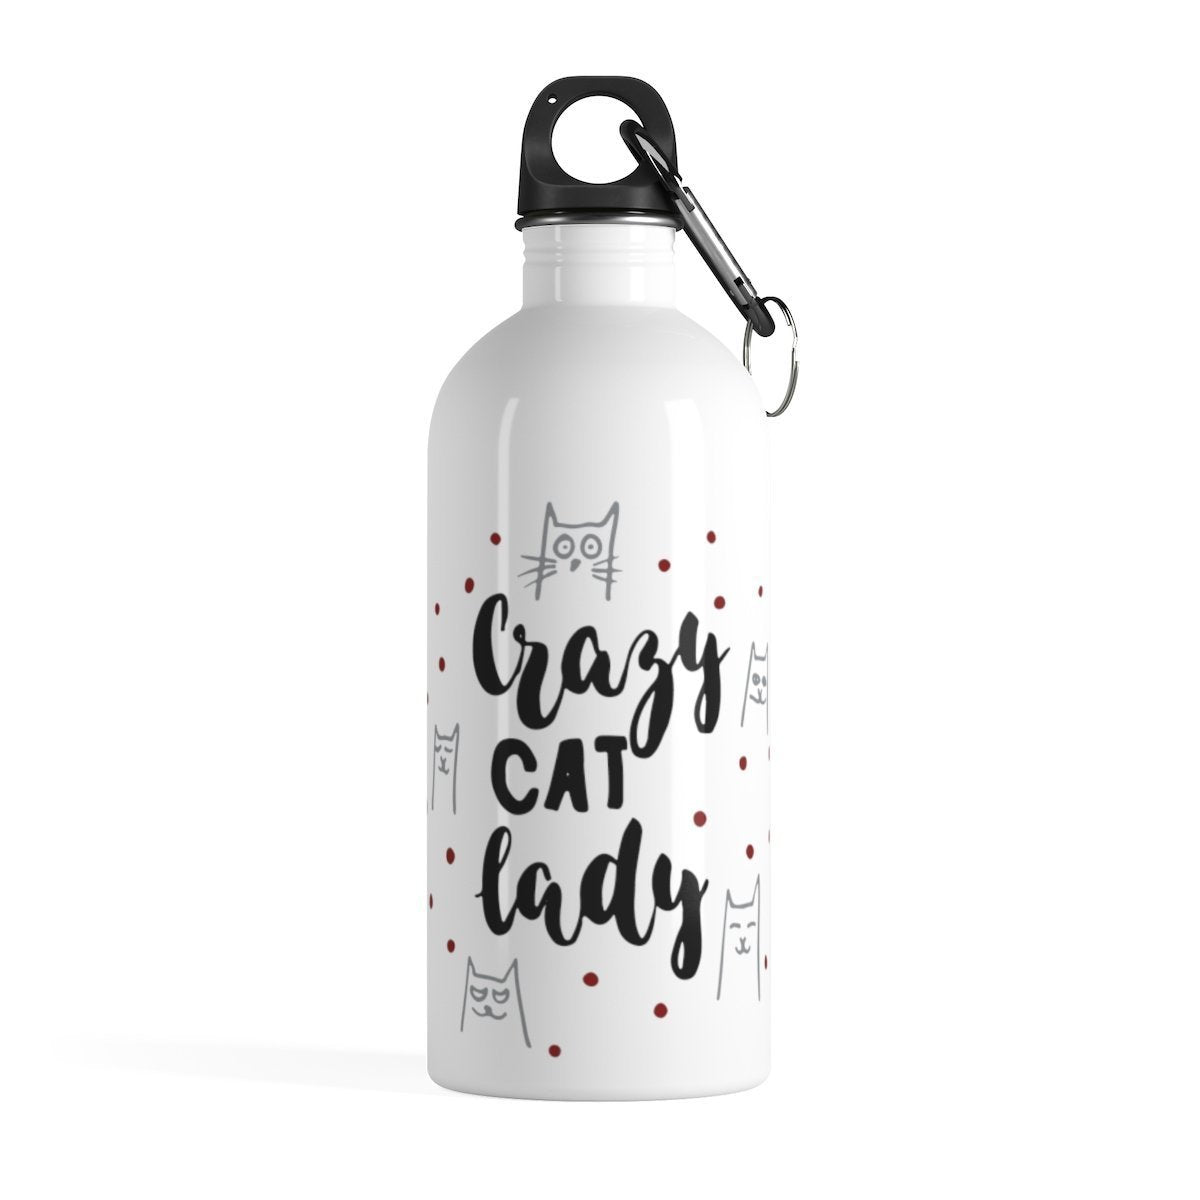 If you're looking for fun things for cat lovers, pick up this cat water bottle featuring the print "Crazy Cat Lady" in black across the front.